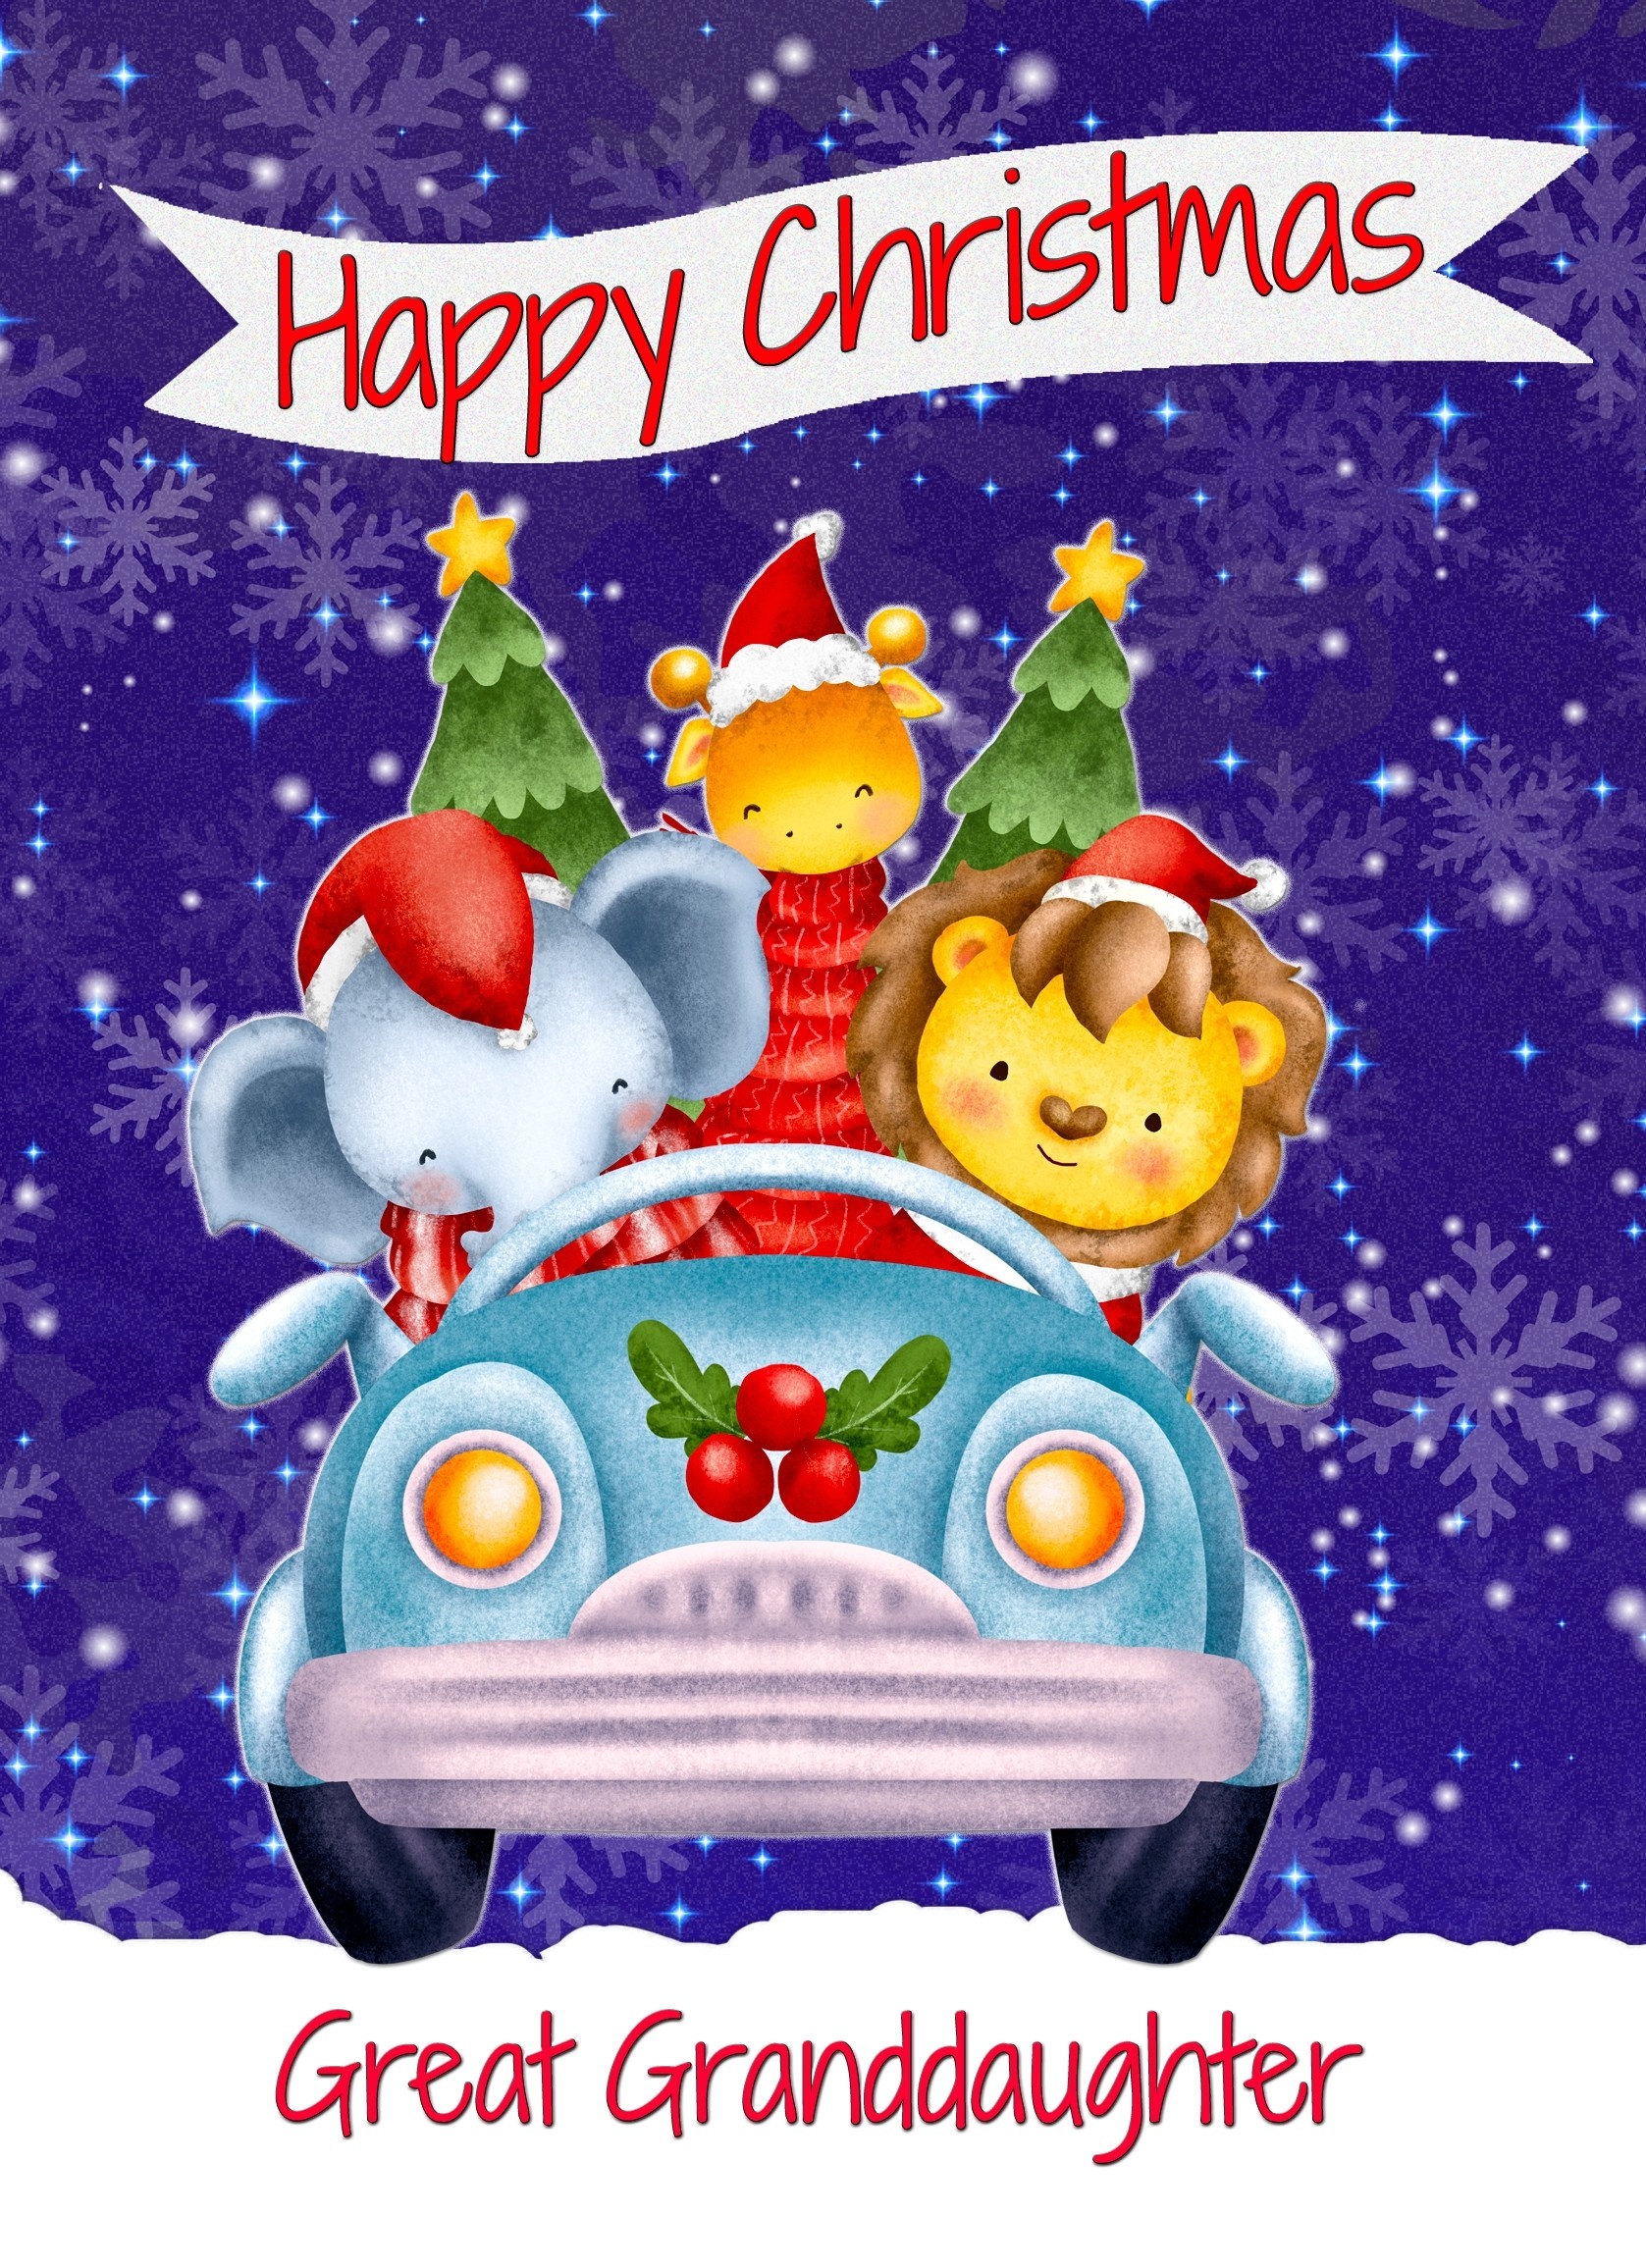 Christmas Card For Great Granddaughter (Happy Christmas, Car Animals)